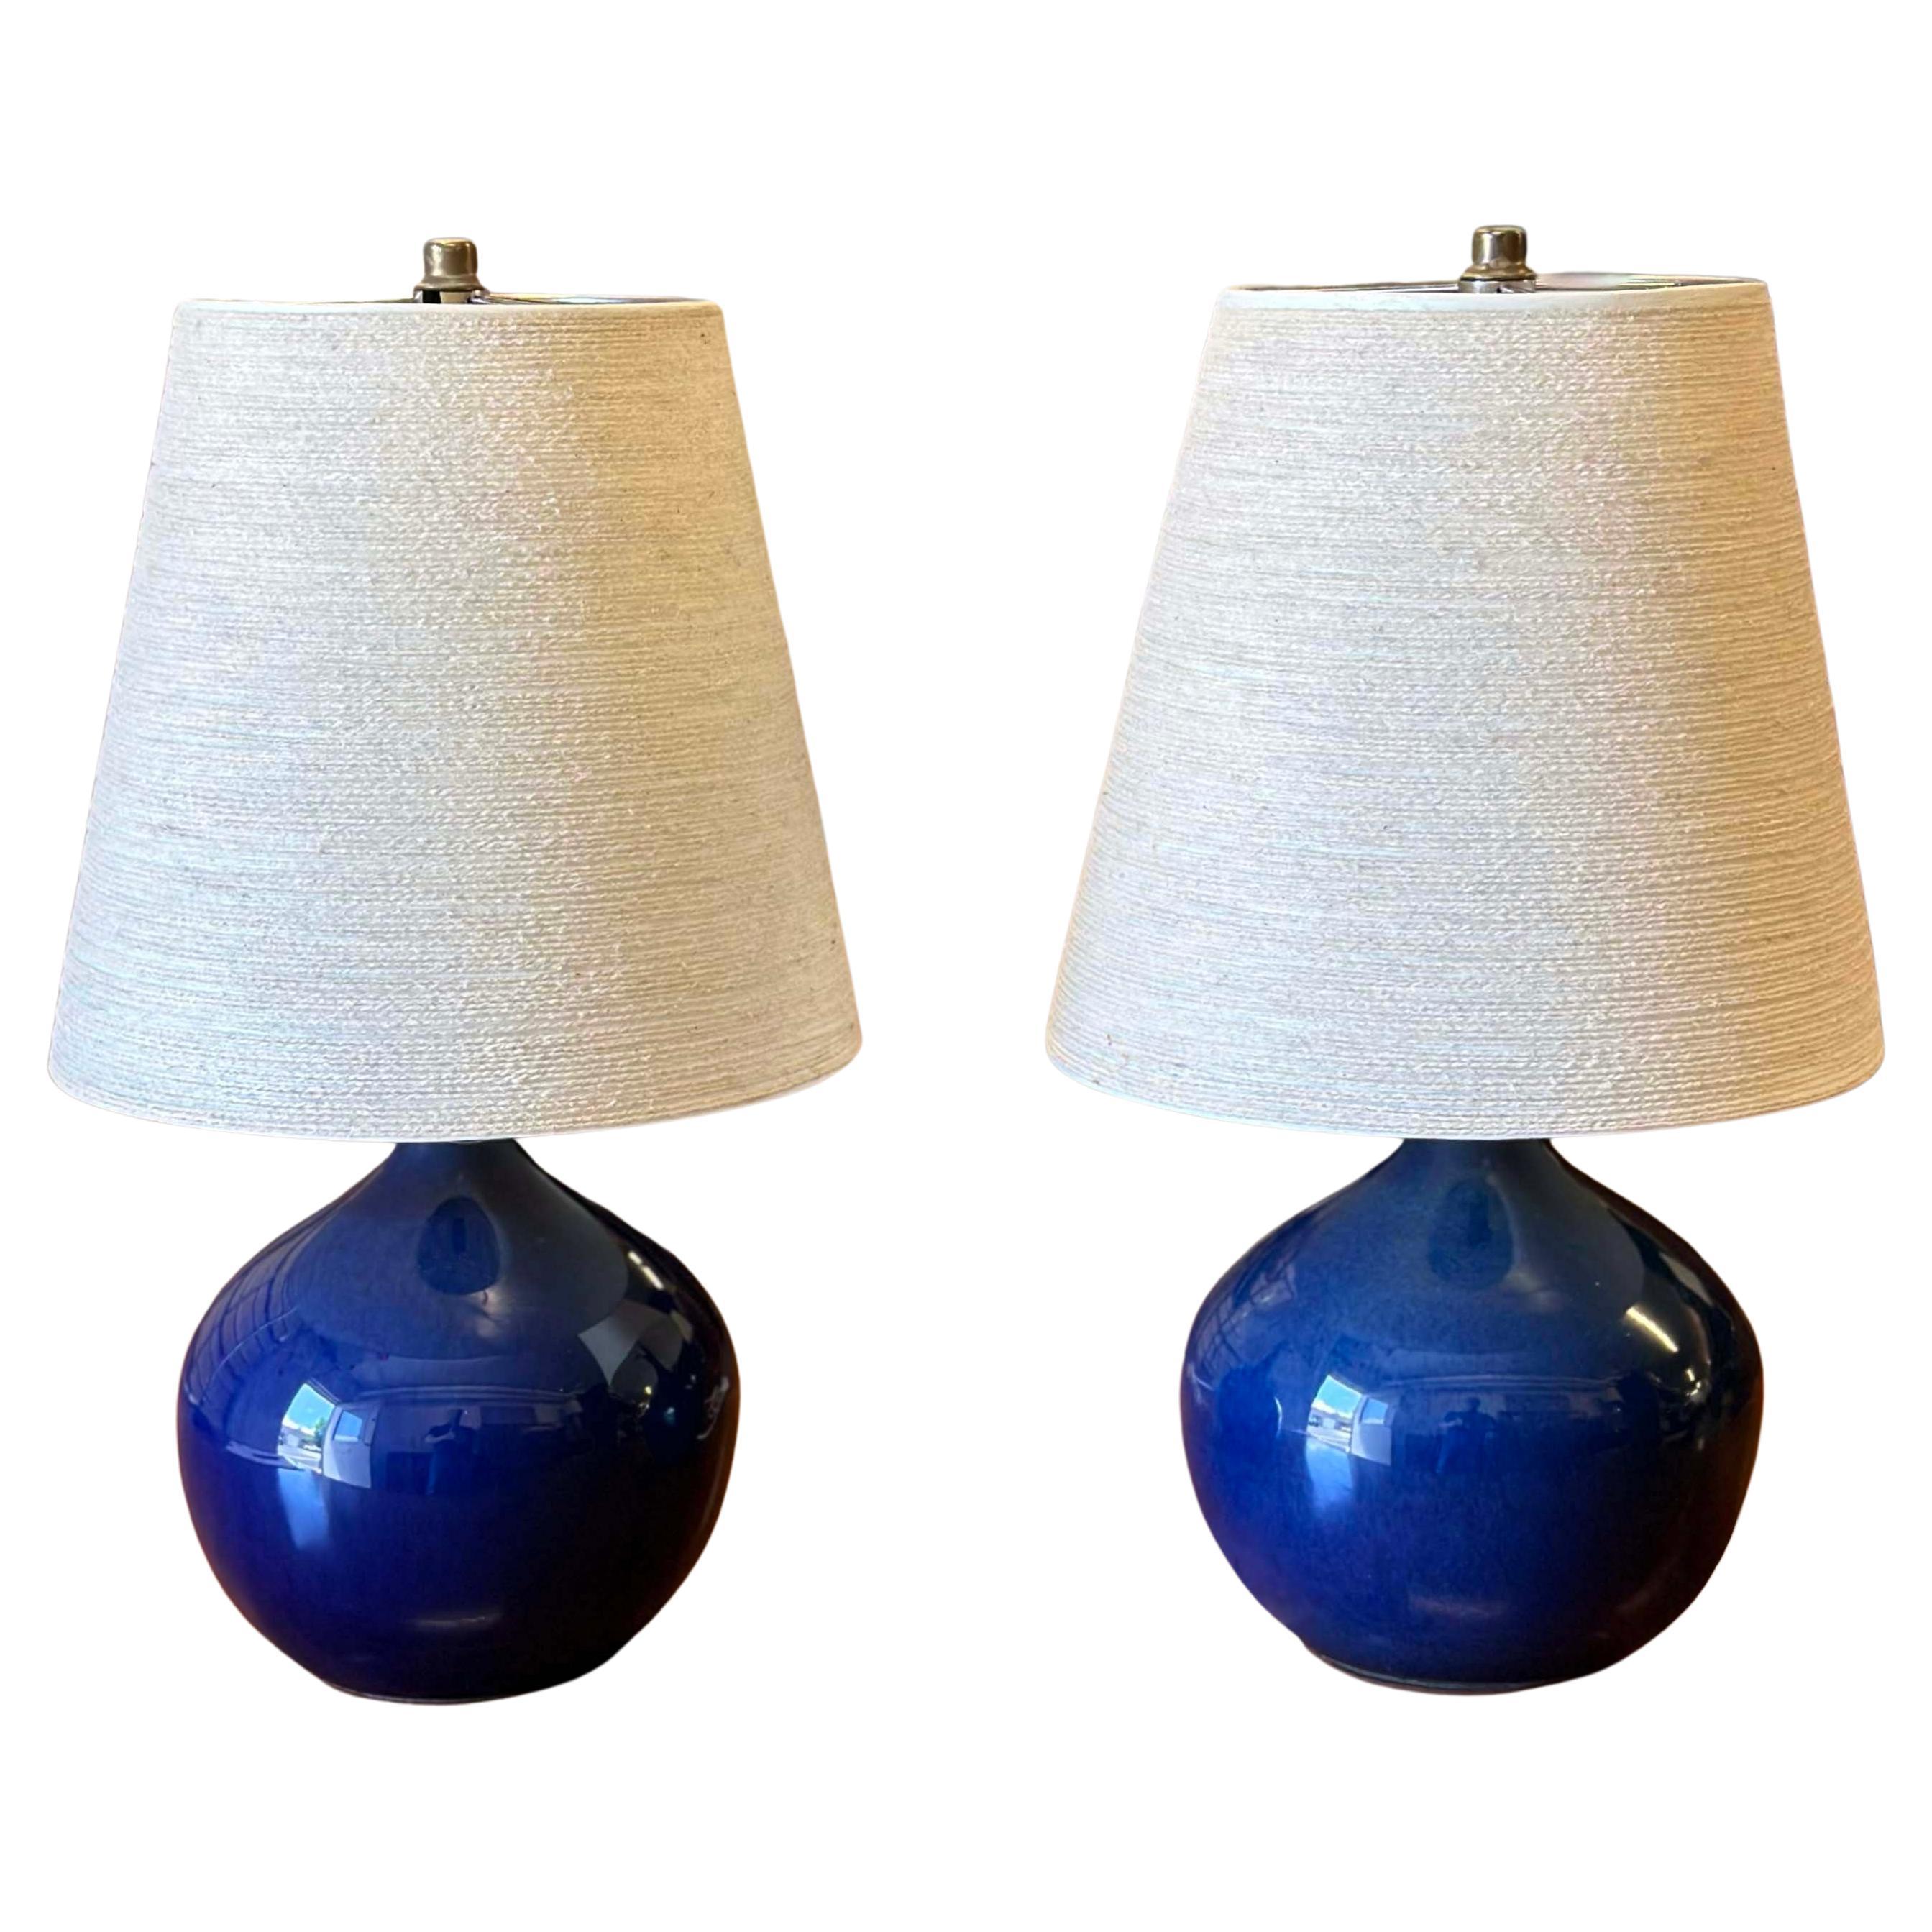 Lotte and Gunnar Bostlund Pair of Iridescent Royal Blue Ceramic Lamps